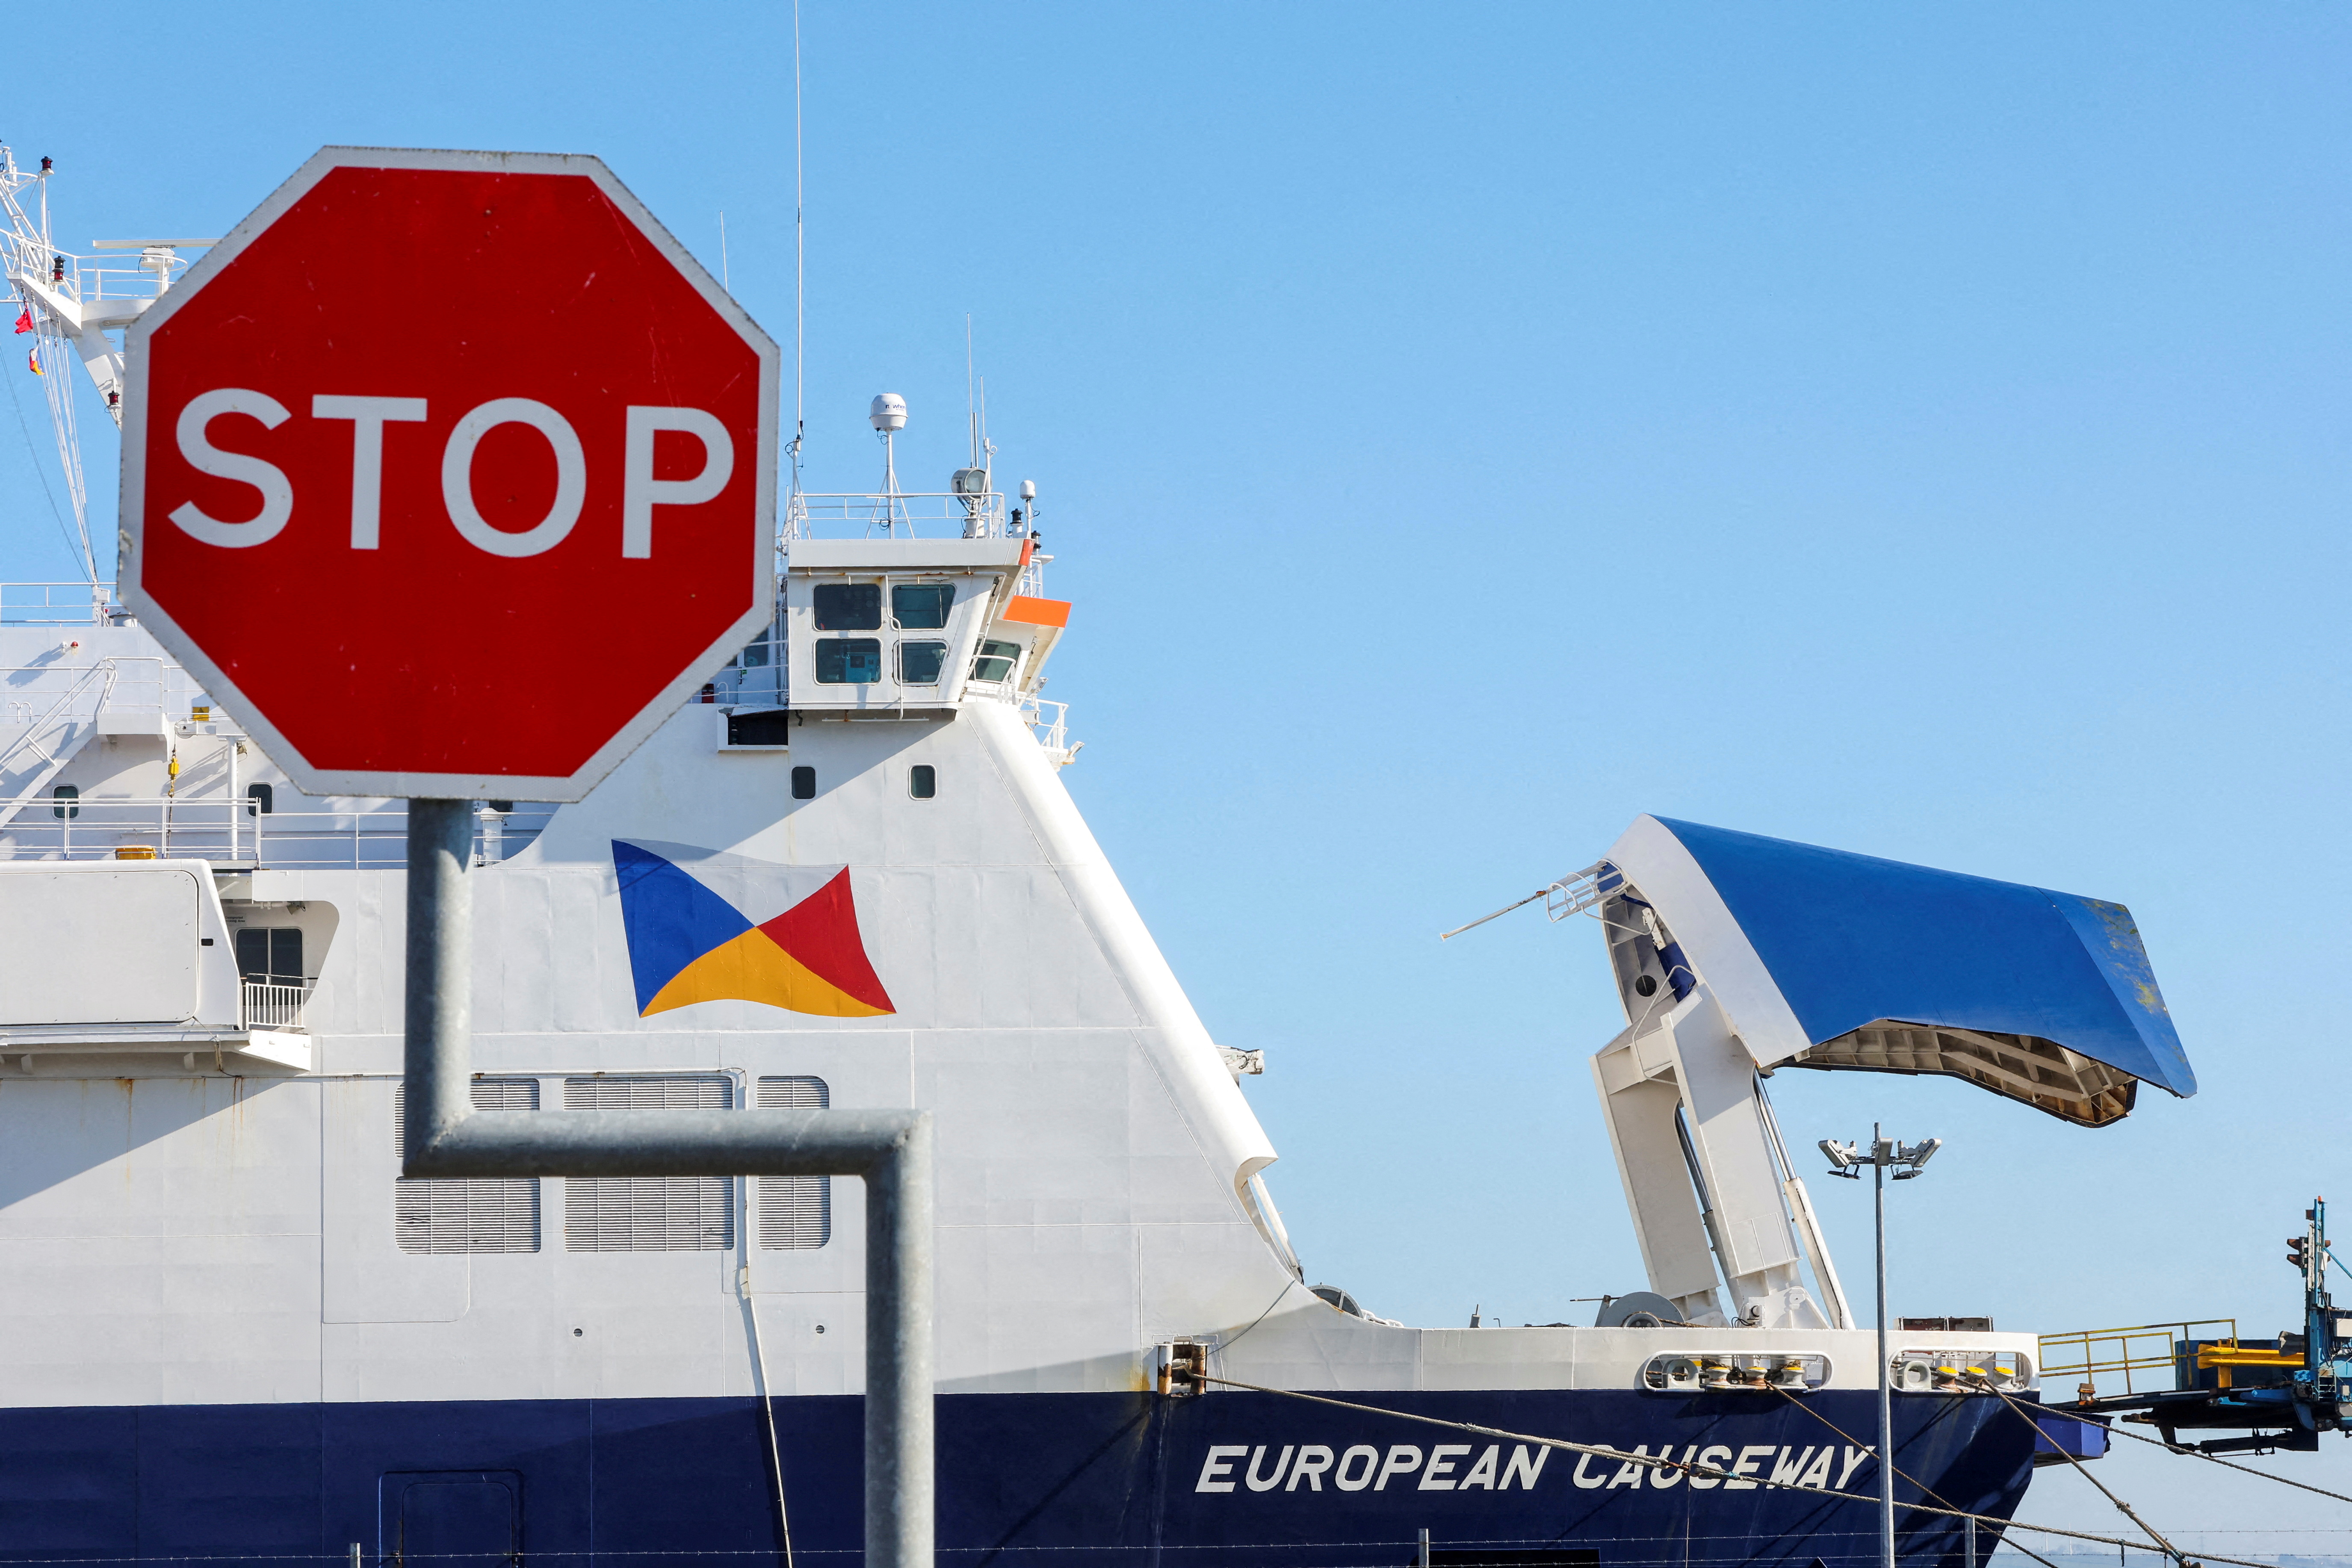 FILE PHOTO: P&O Ferries ship European Causeway, is seen in the Port of Larne